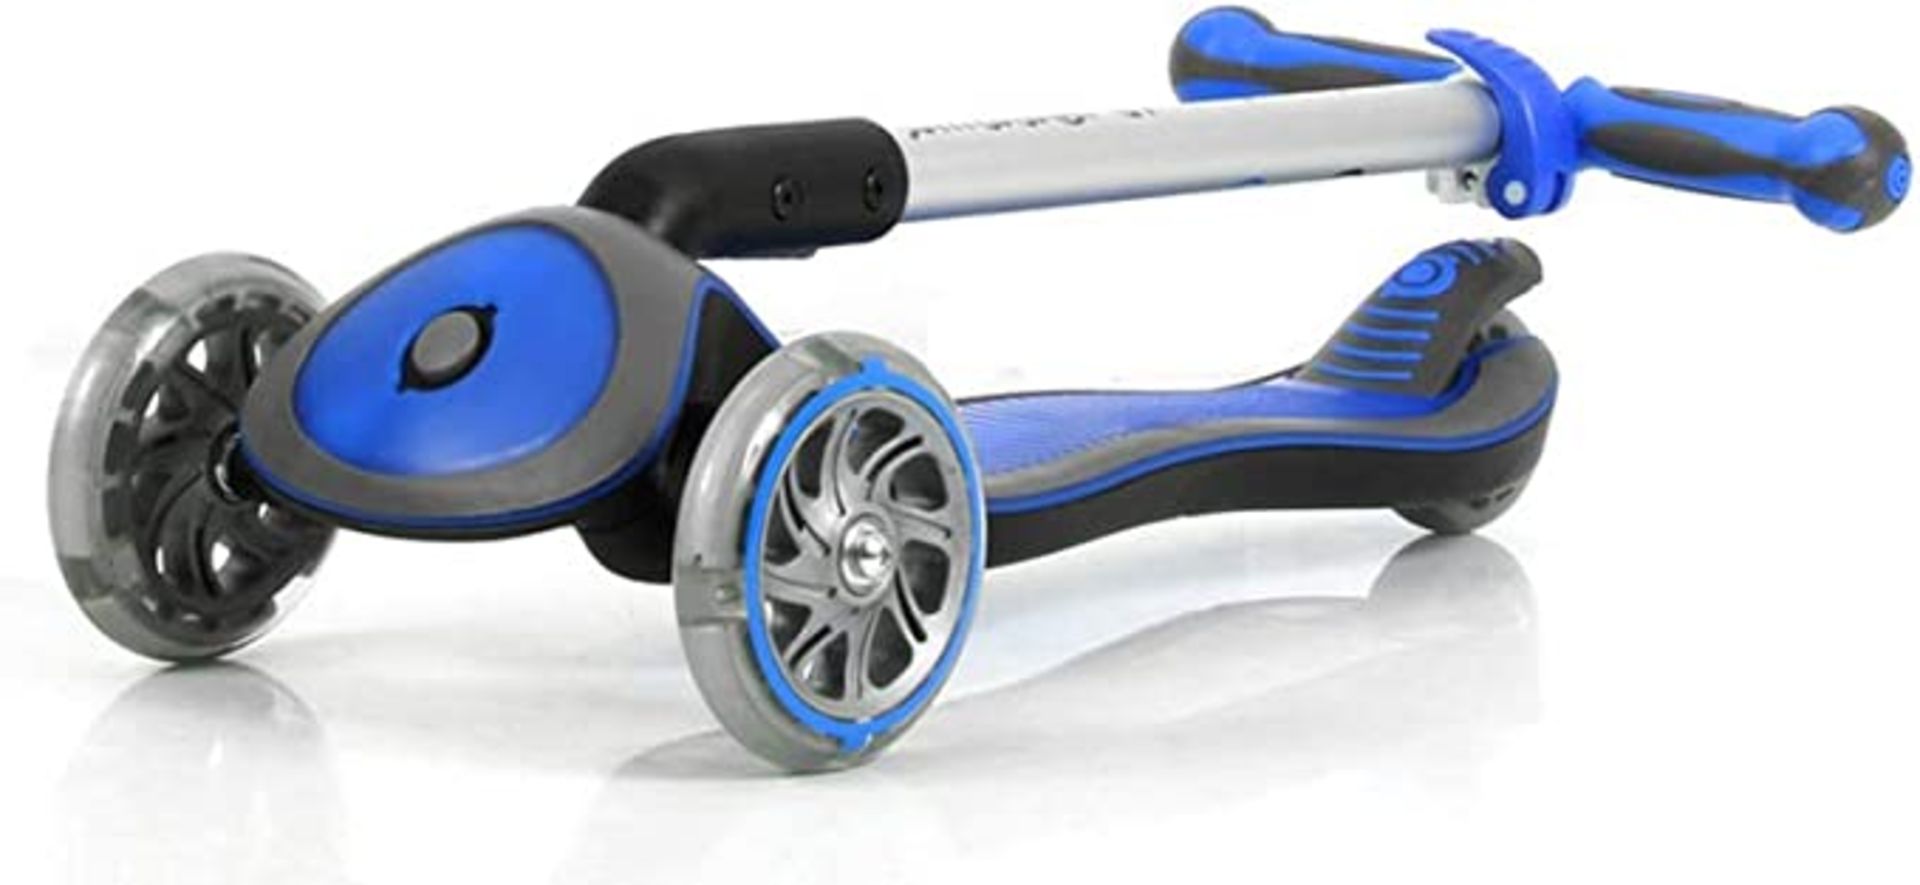 Globber Elite Scooter With Light Up Deck and Wheels - Navy Blue. RRP £129.99. - BI - Image 2 of 2